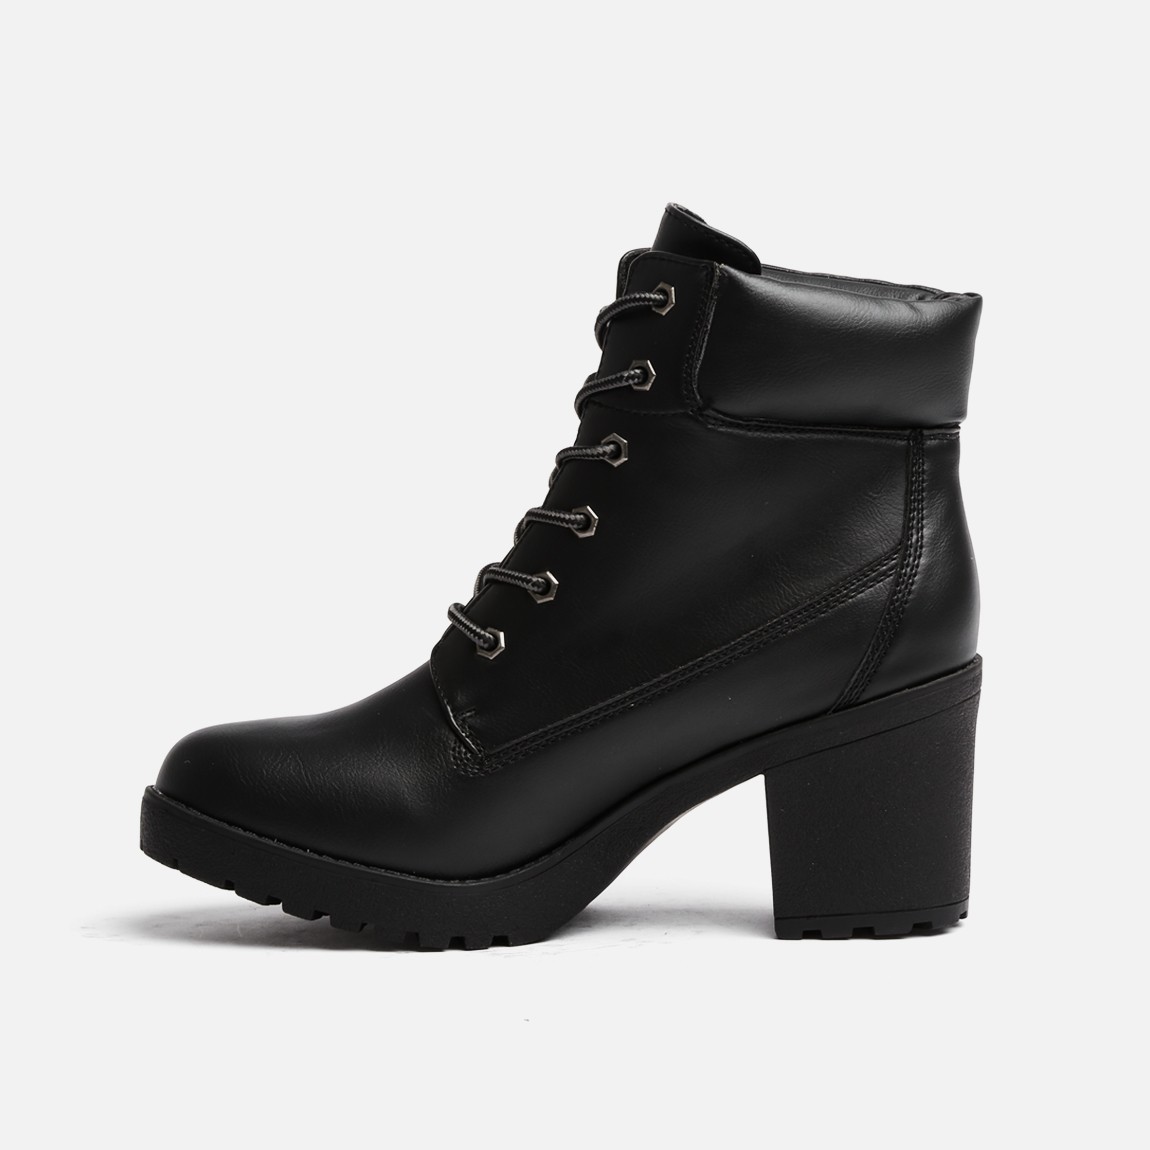 Bey- Black Therapy Boots | Superbalist.com